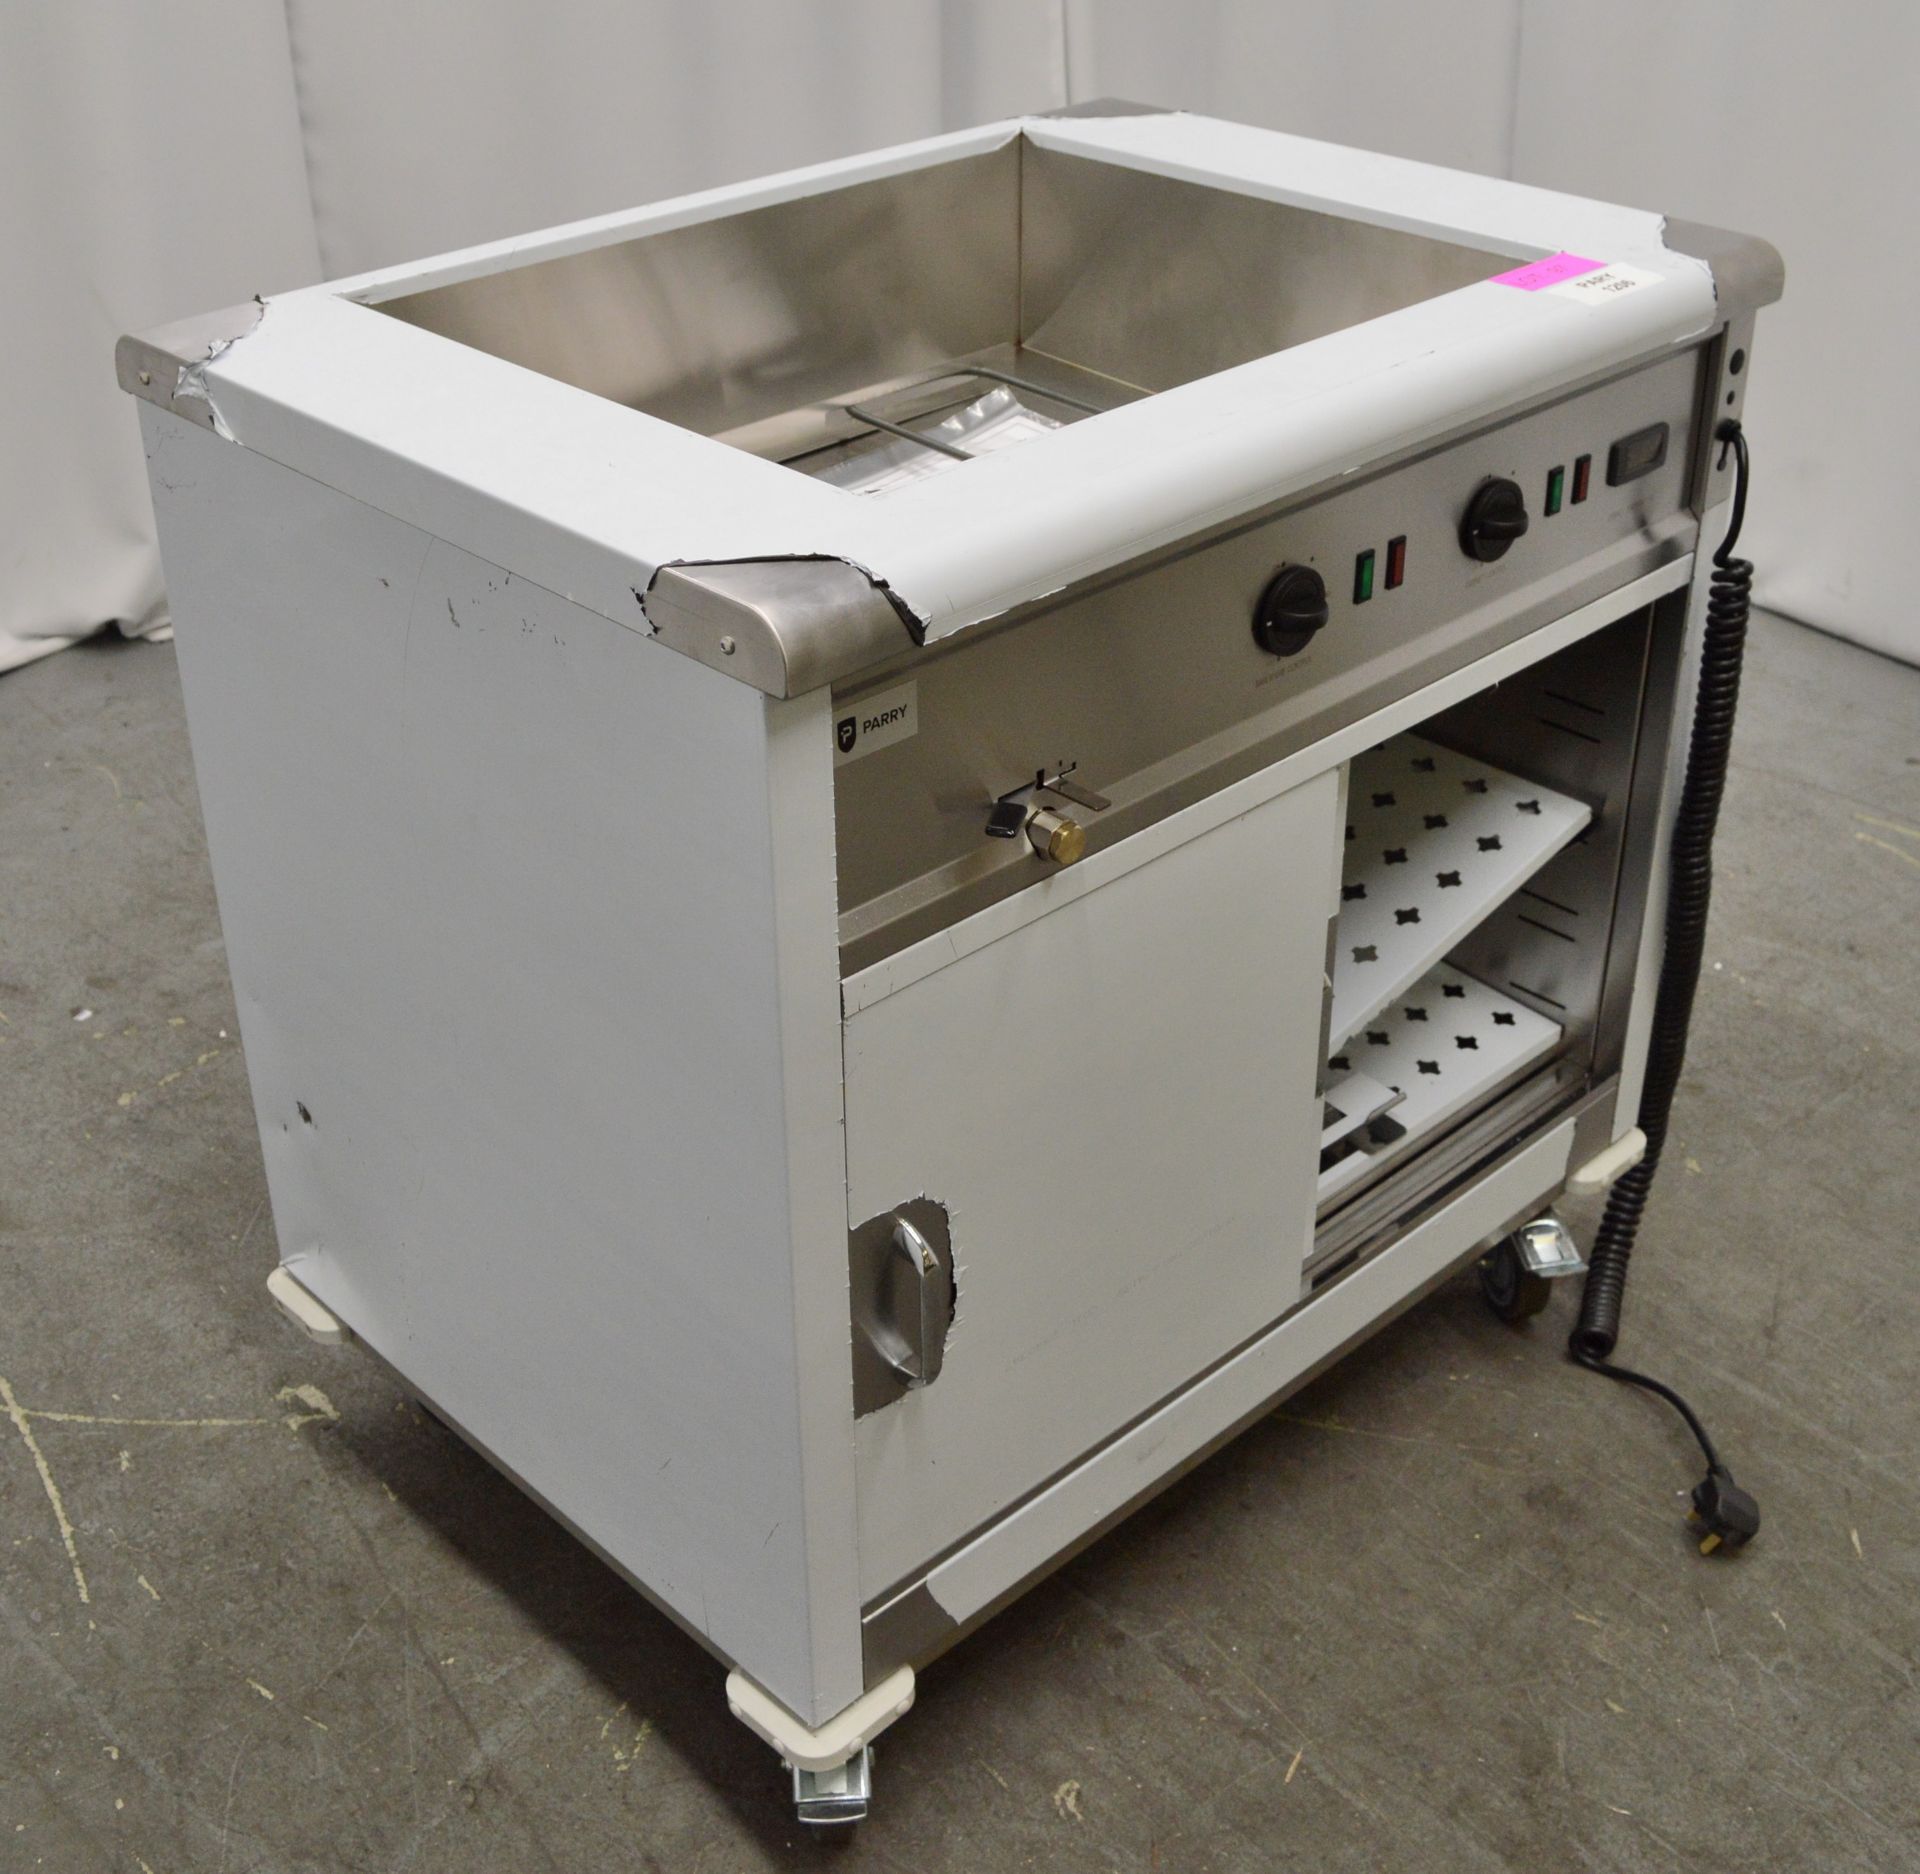 Parry MSB9 stainless steel mobile bain marie survery, 1000x650x900mm (LxDxH) - Image 4 of 9